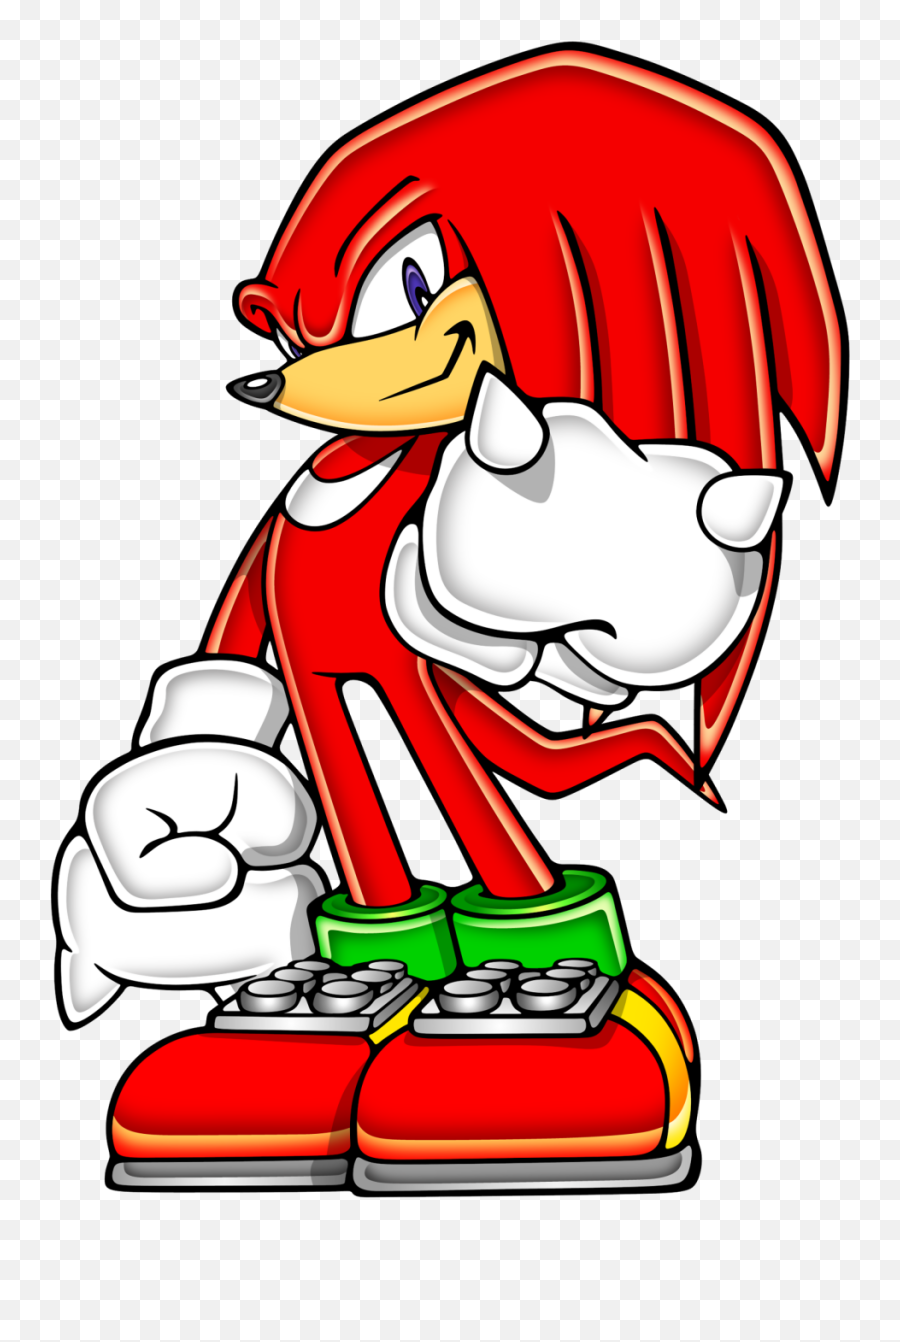 5 Sonic Characters That Could Be Cool Additions To Smash - Knuckles The Echidna Sonic Advance Emoji,Super Smash Bros Ultimate Logo Png